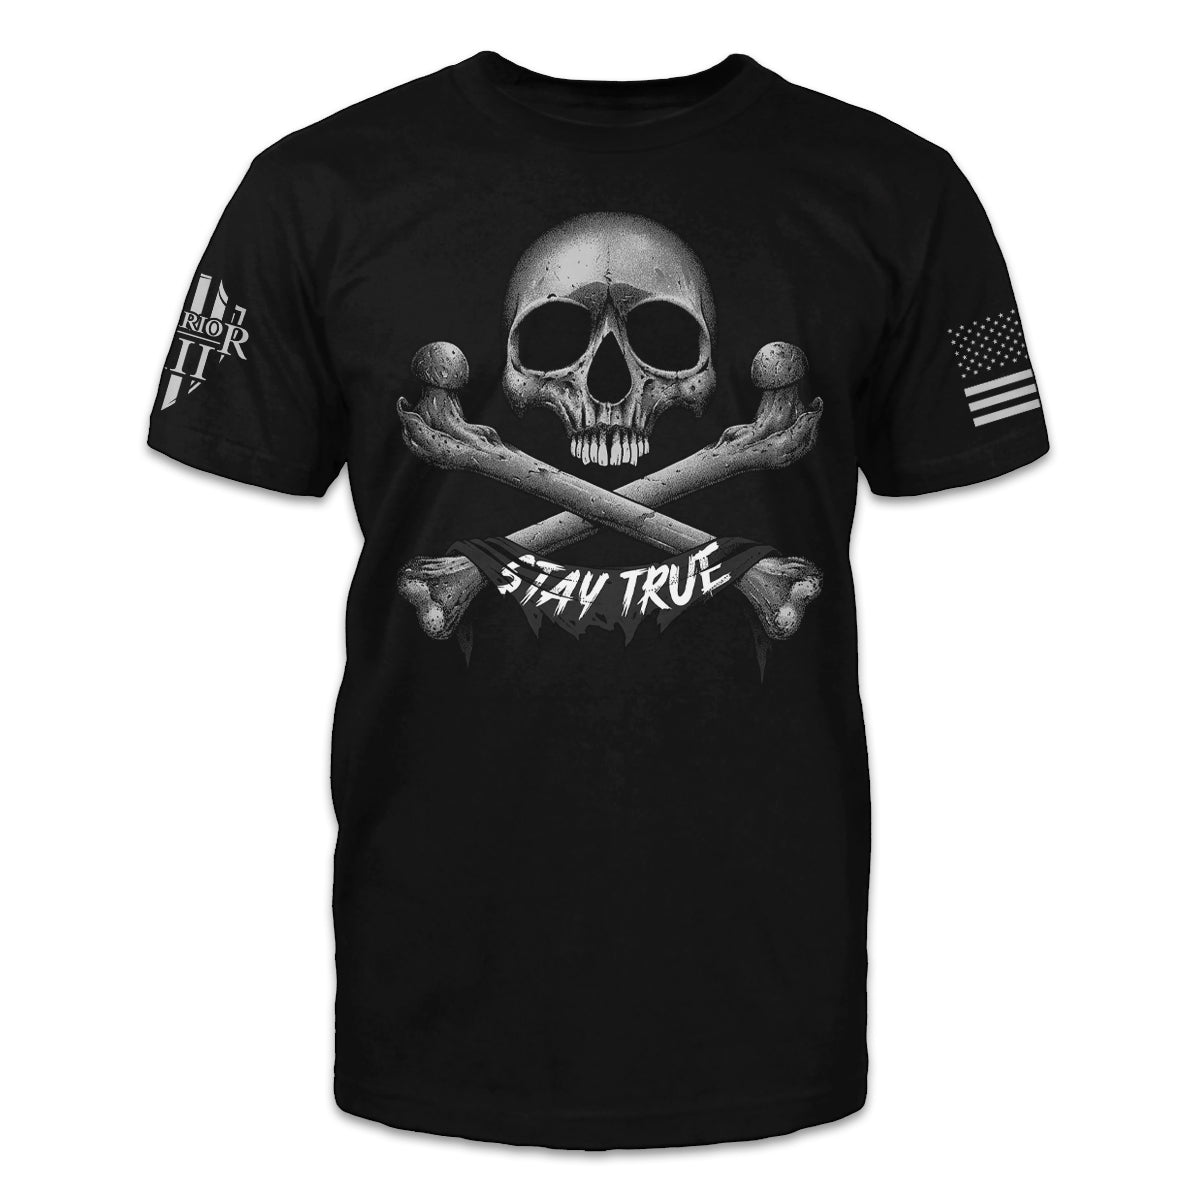 A black t-shirt with an image on the front of a skull and crossbones with a banner below which says "Stay True."